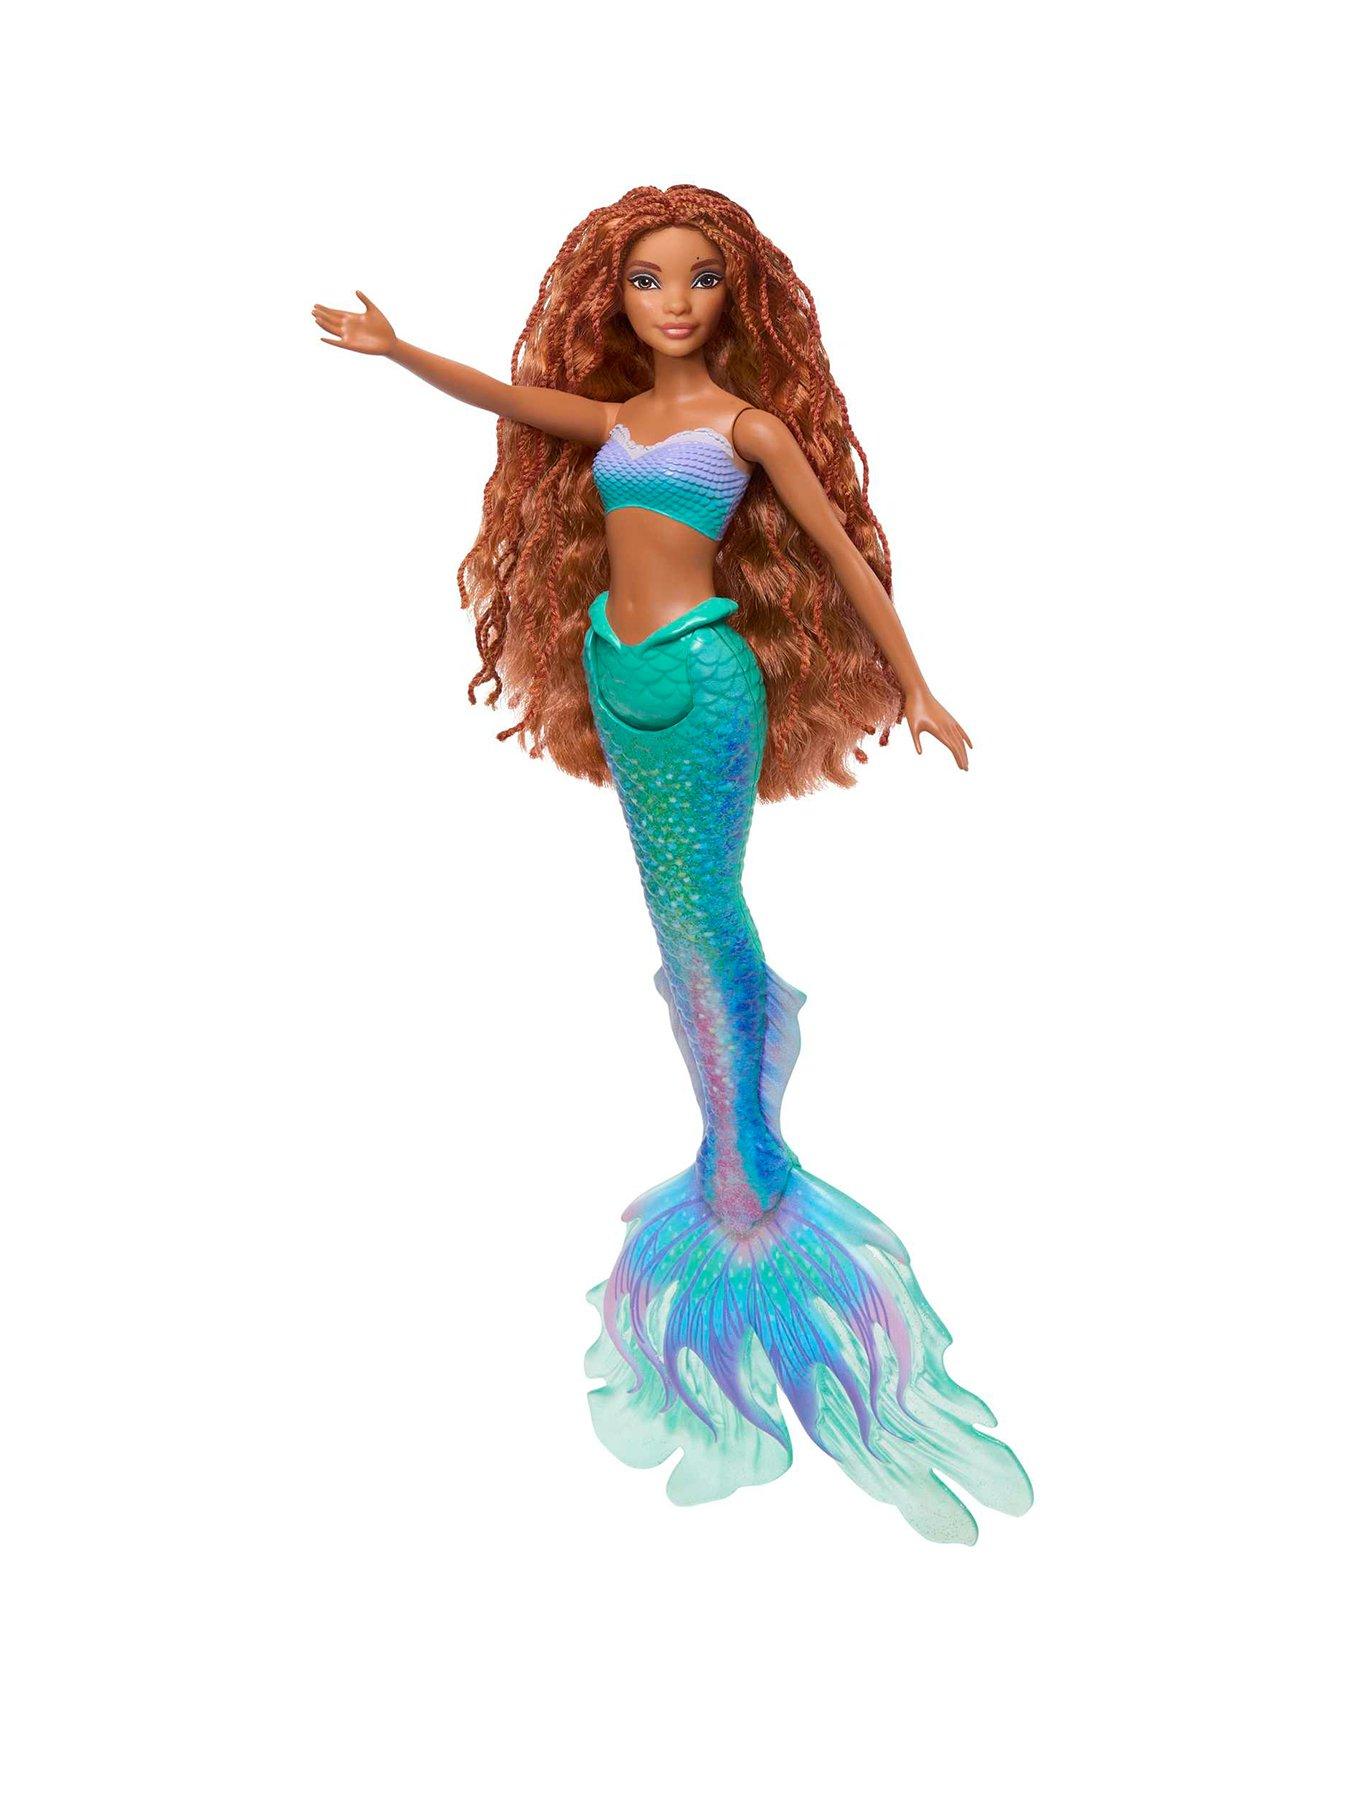 Disney Princess Shimmer Spa Ariel 8-inch Styling Head, 20-Pieces, Red Hair,  Pretend Play, Officially Licensed Kids Toys for Ages 3 Up by Just Play